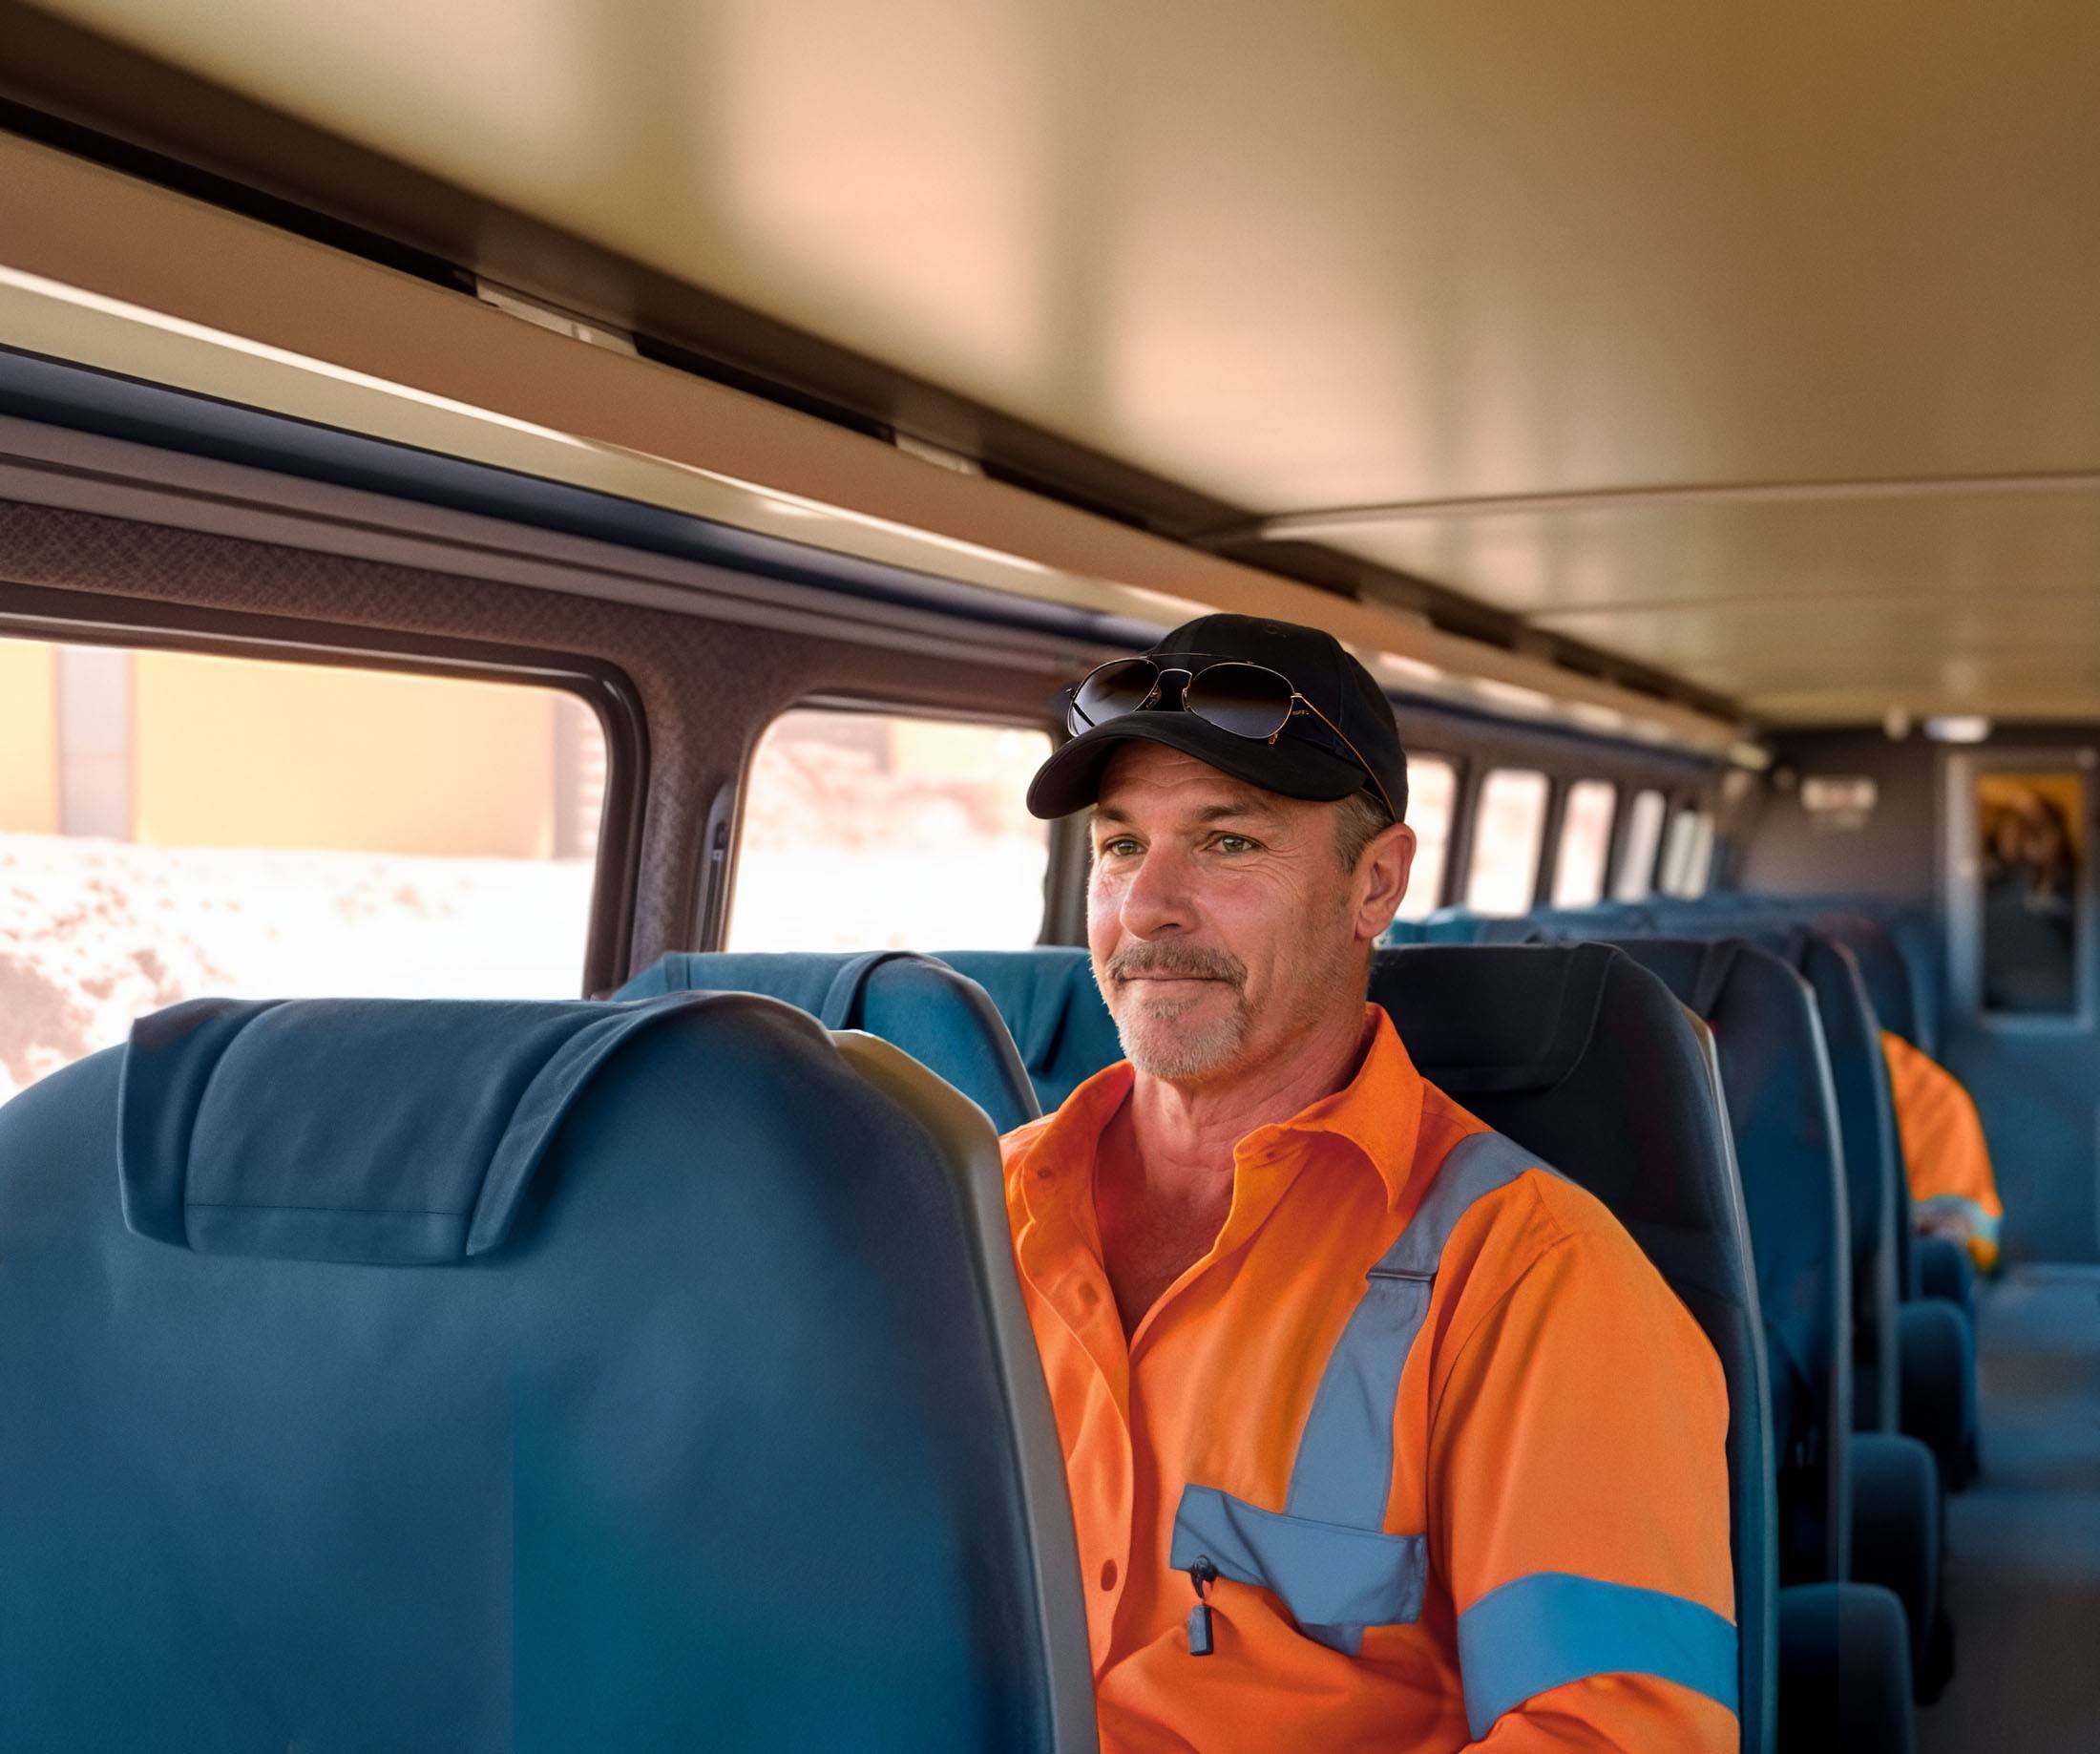 fifo-worker-bus-seated